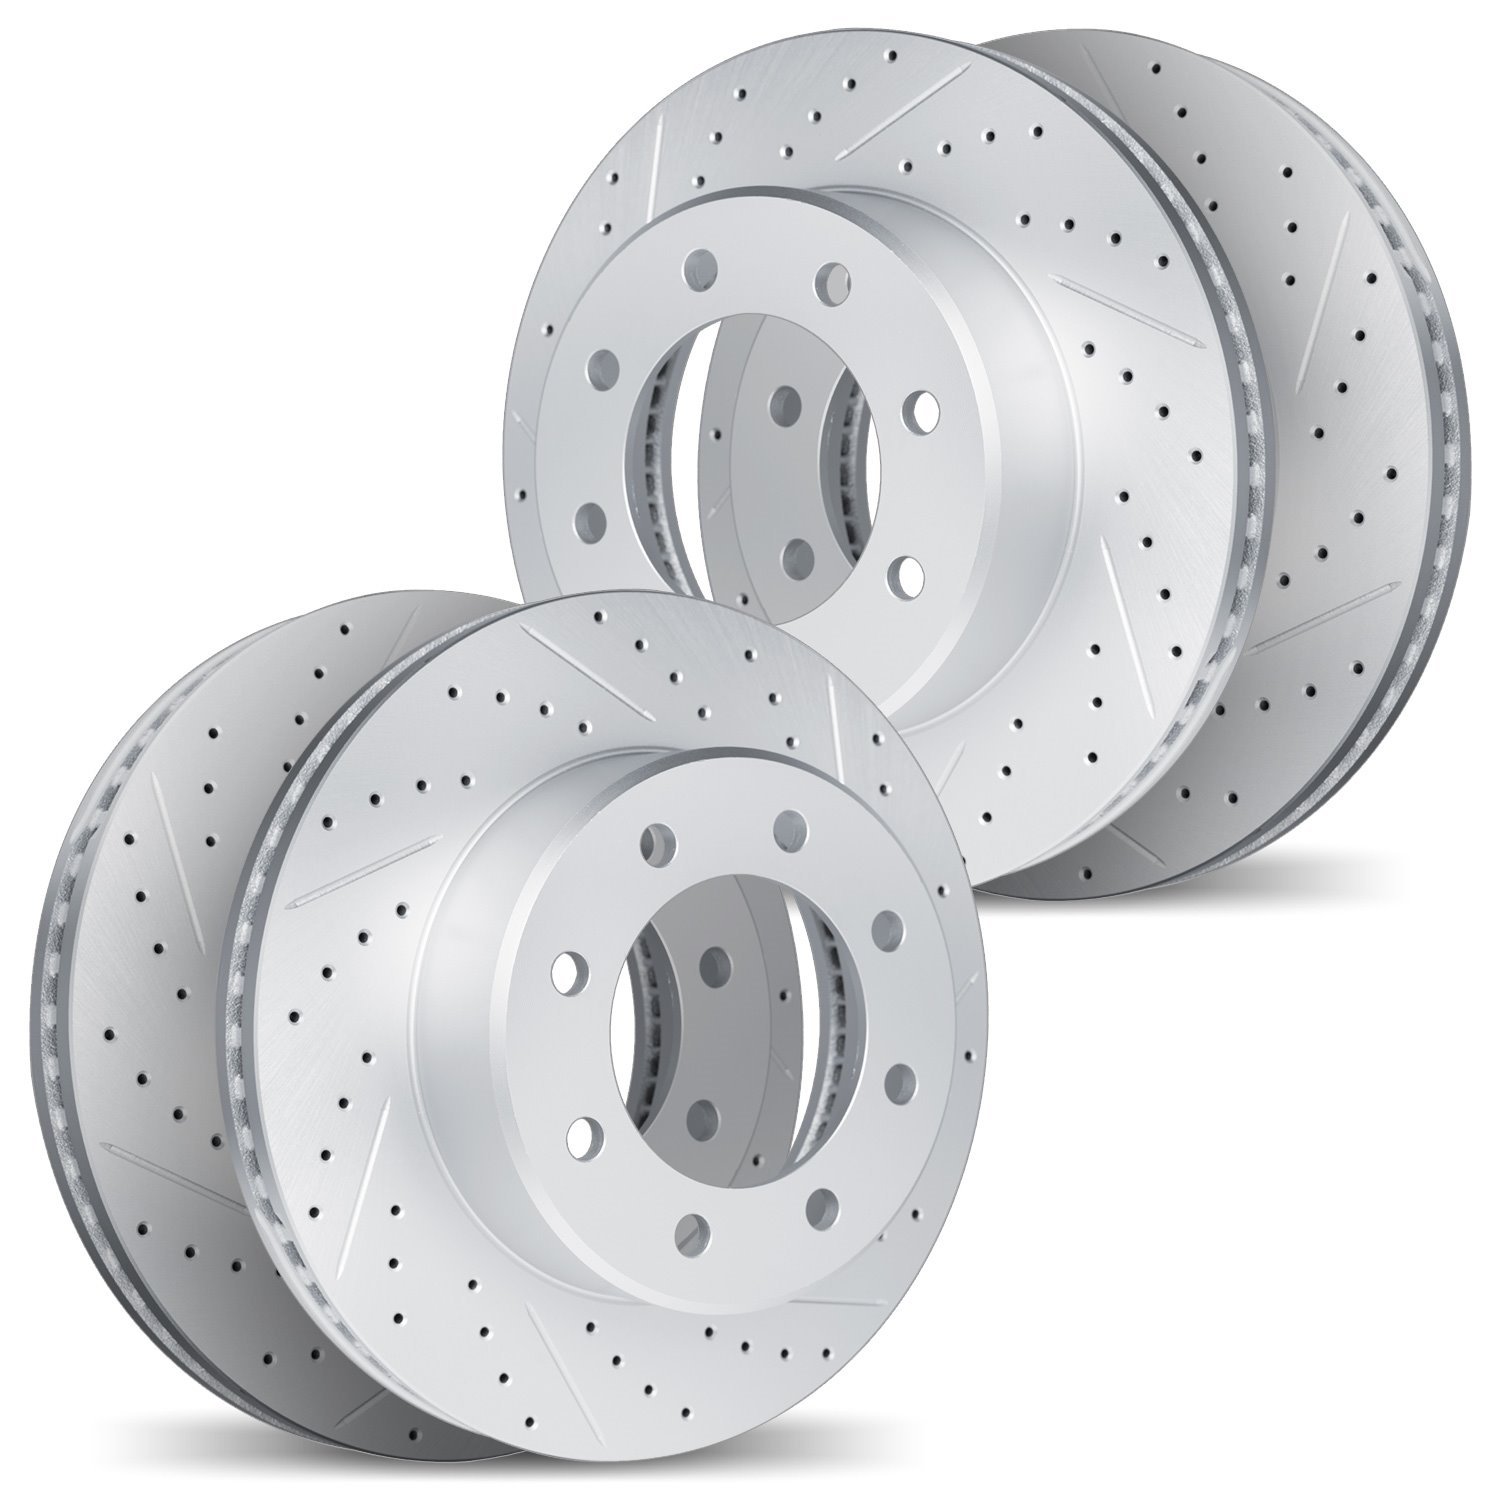 2004-54124 Geoperformance Drilled/Slotted Brake Rotors, Fits Select Ford/Lincoln/Mercury/Mazda, Position: Front and Rear